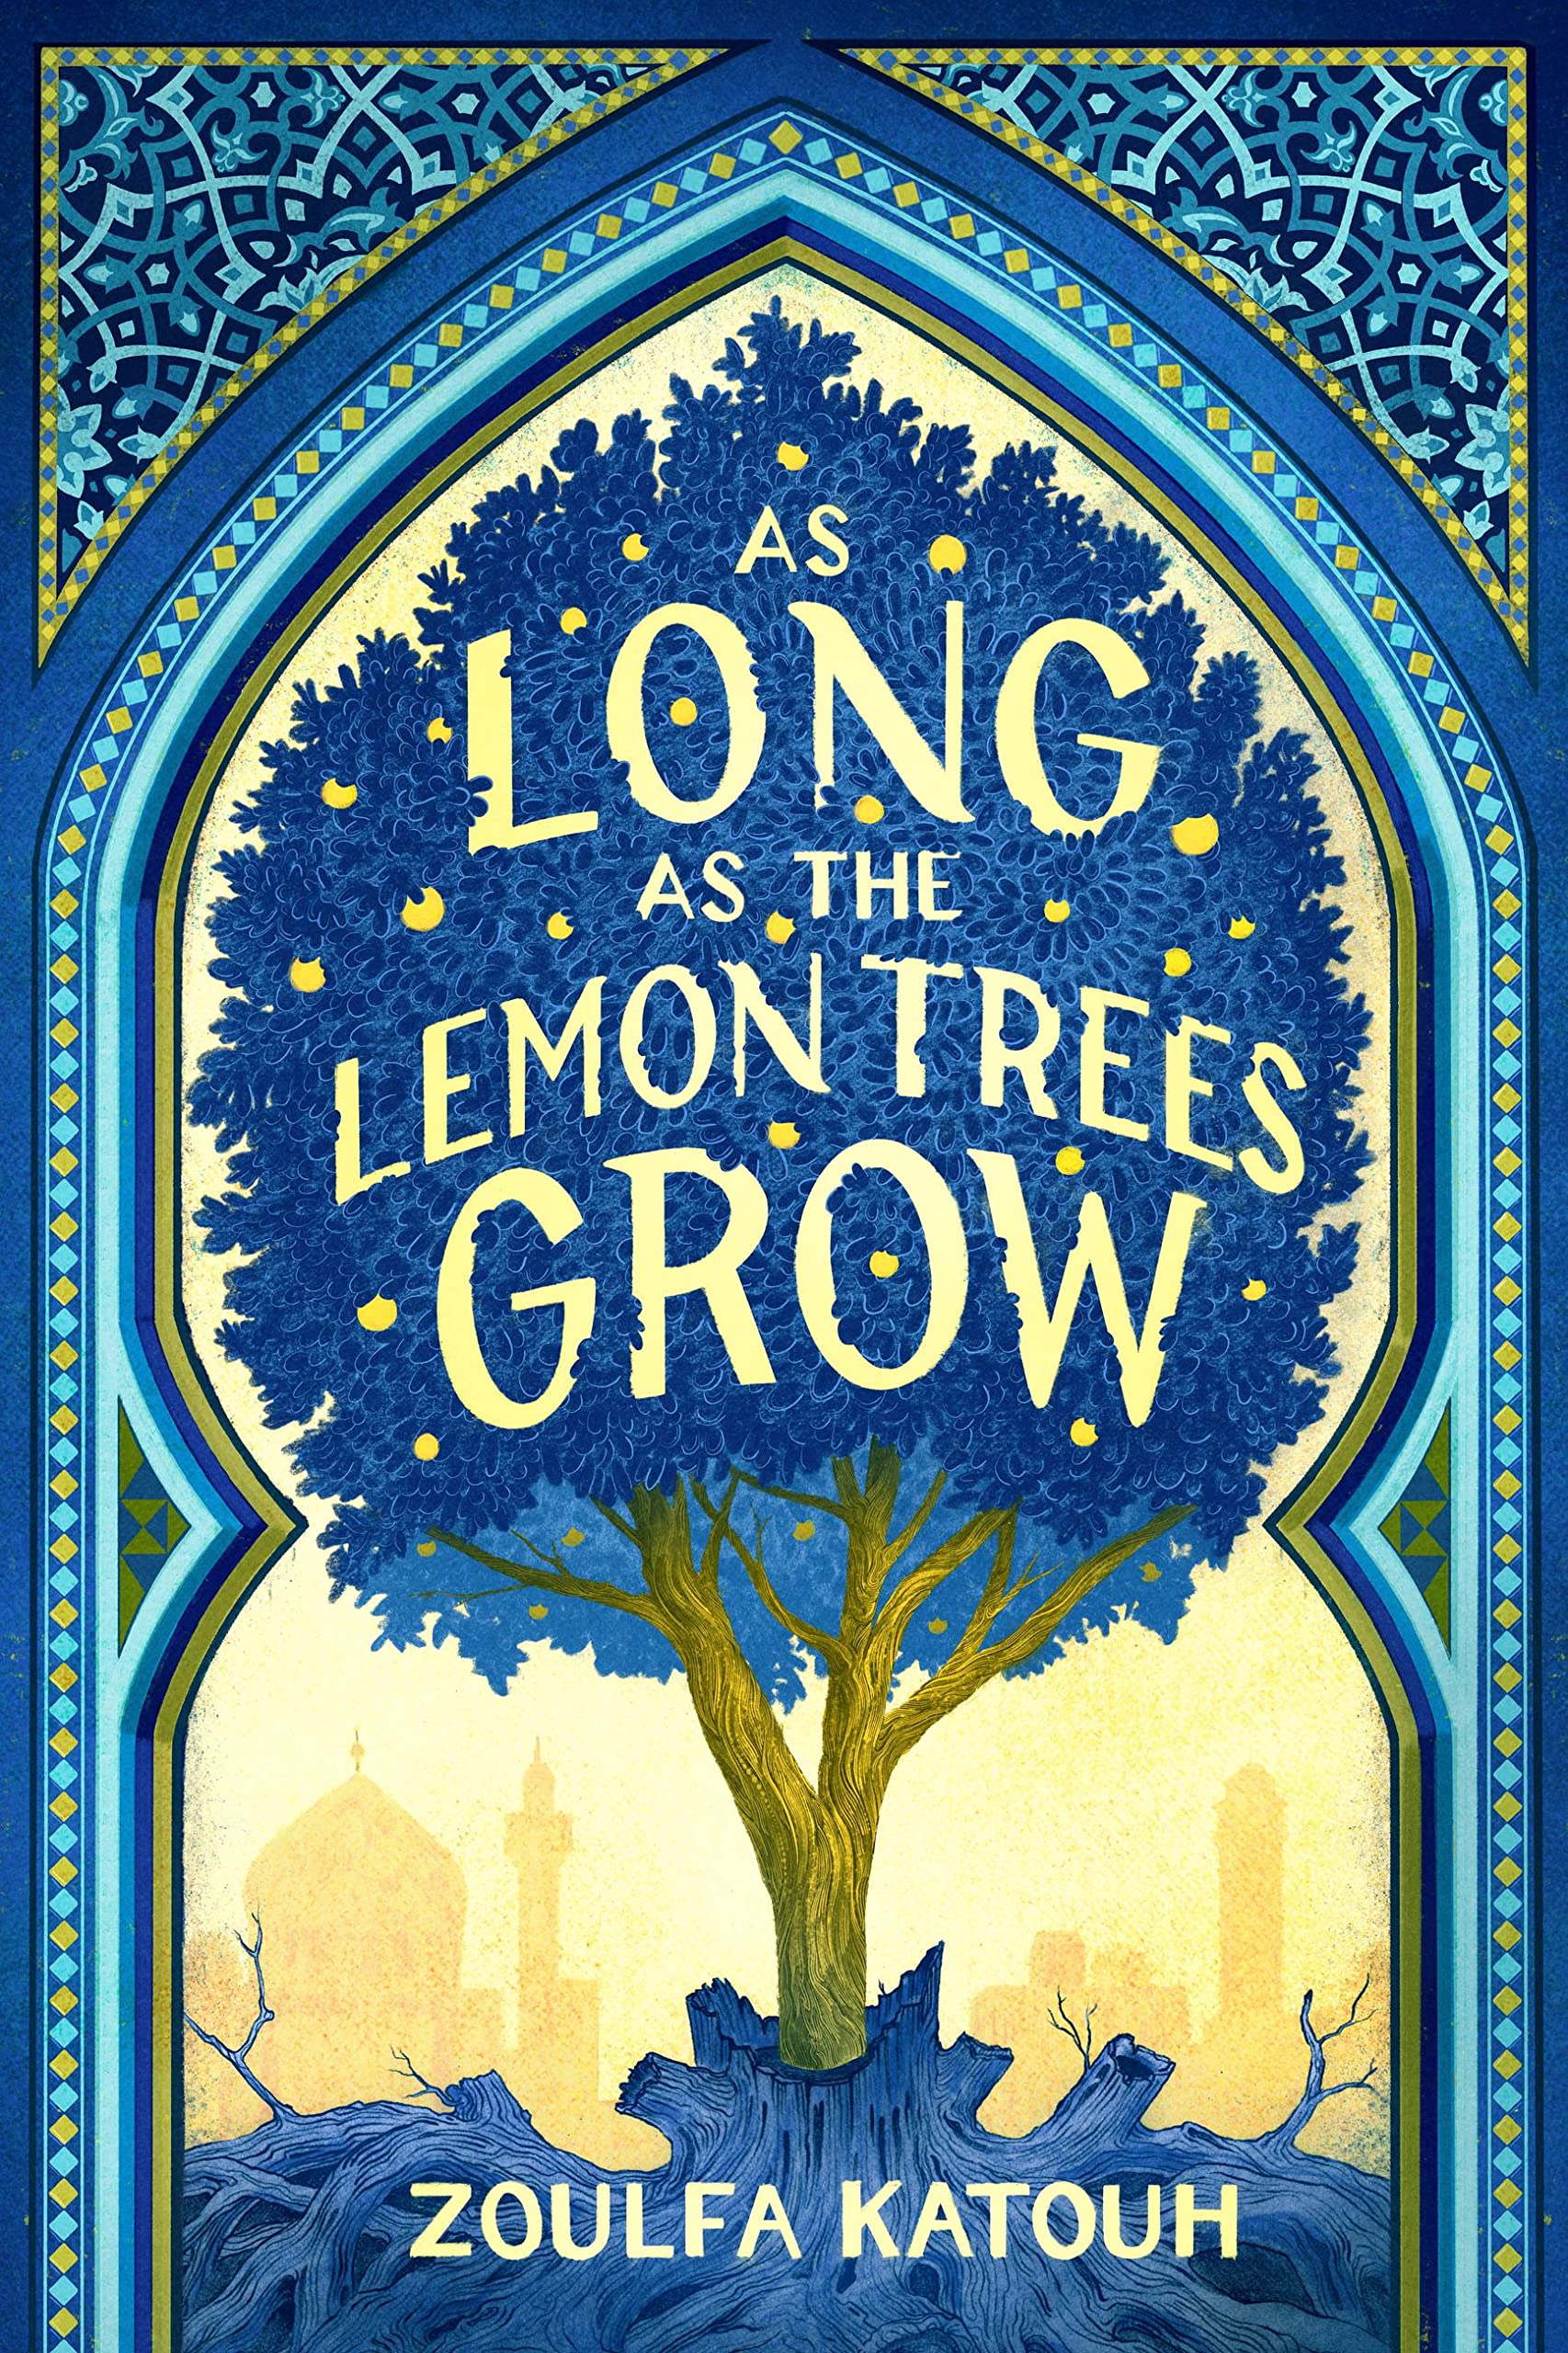 As Long As the Lemon Trees Grow—25 Best New Books for 7th Graders